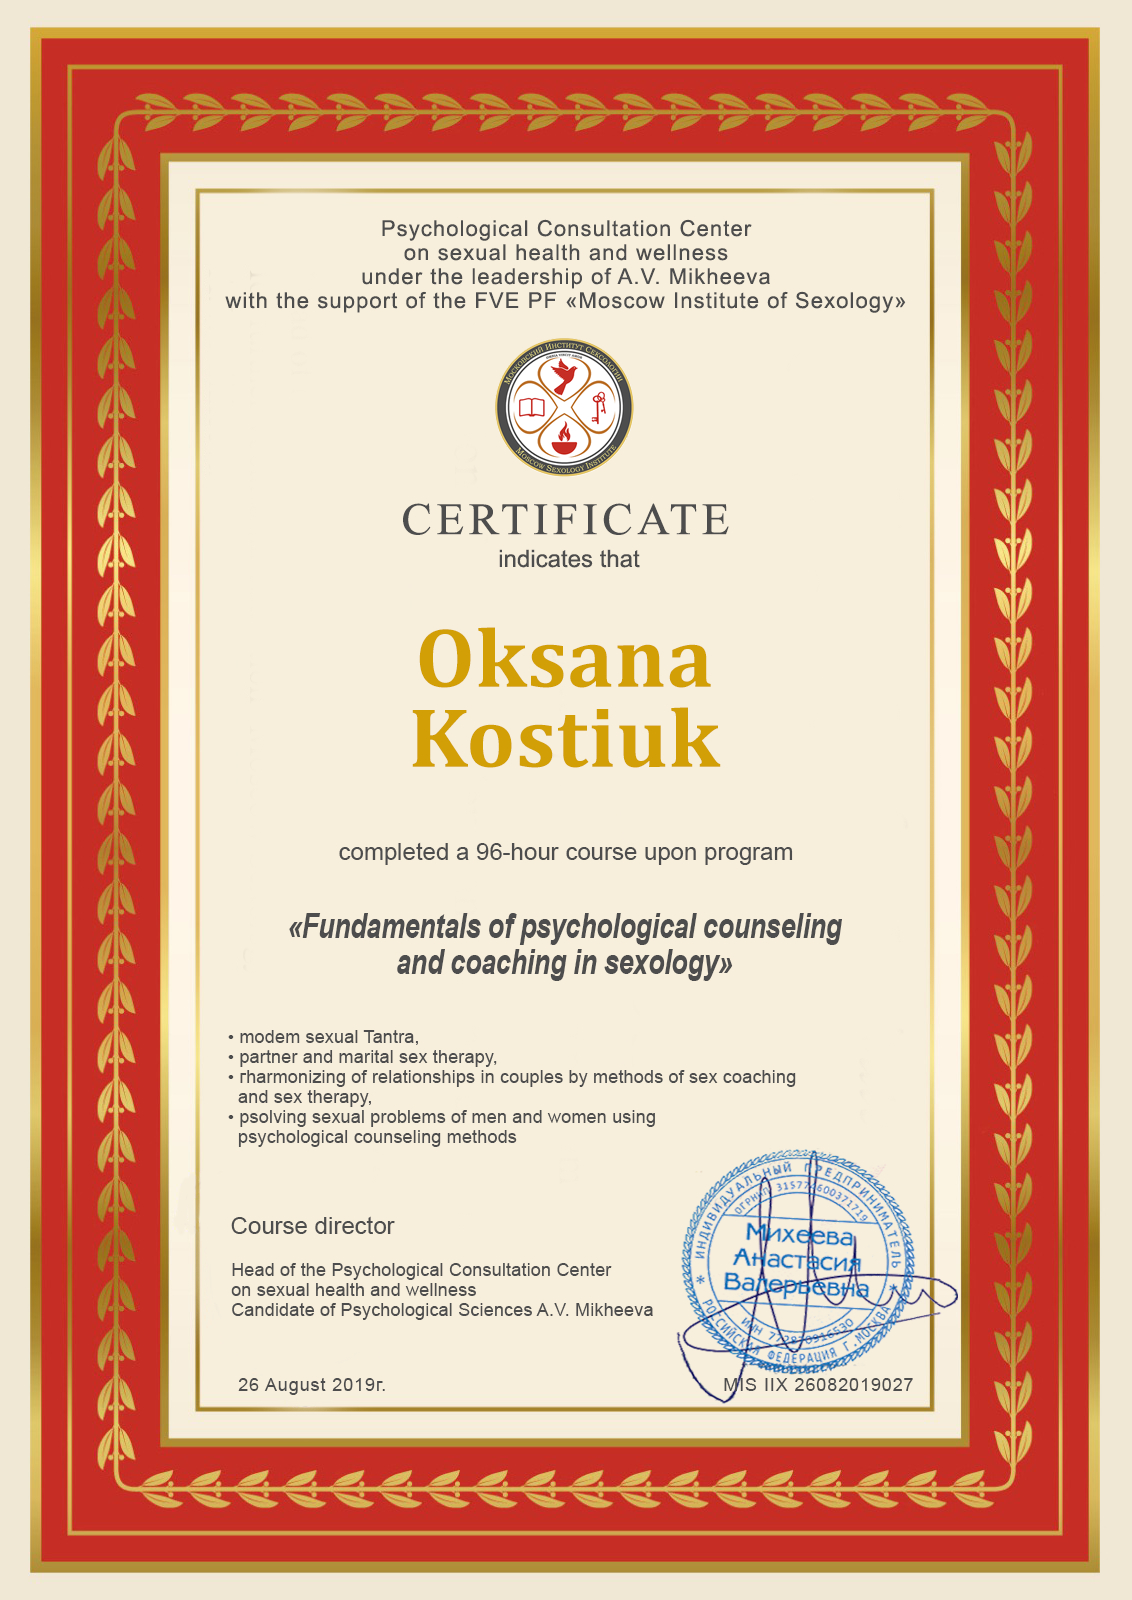 Basics of psychological counseling and coaching in sexology